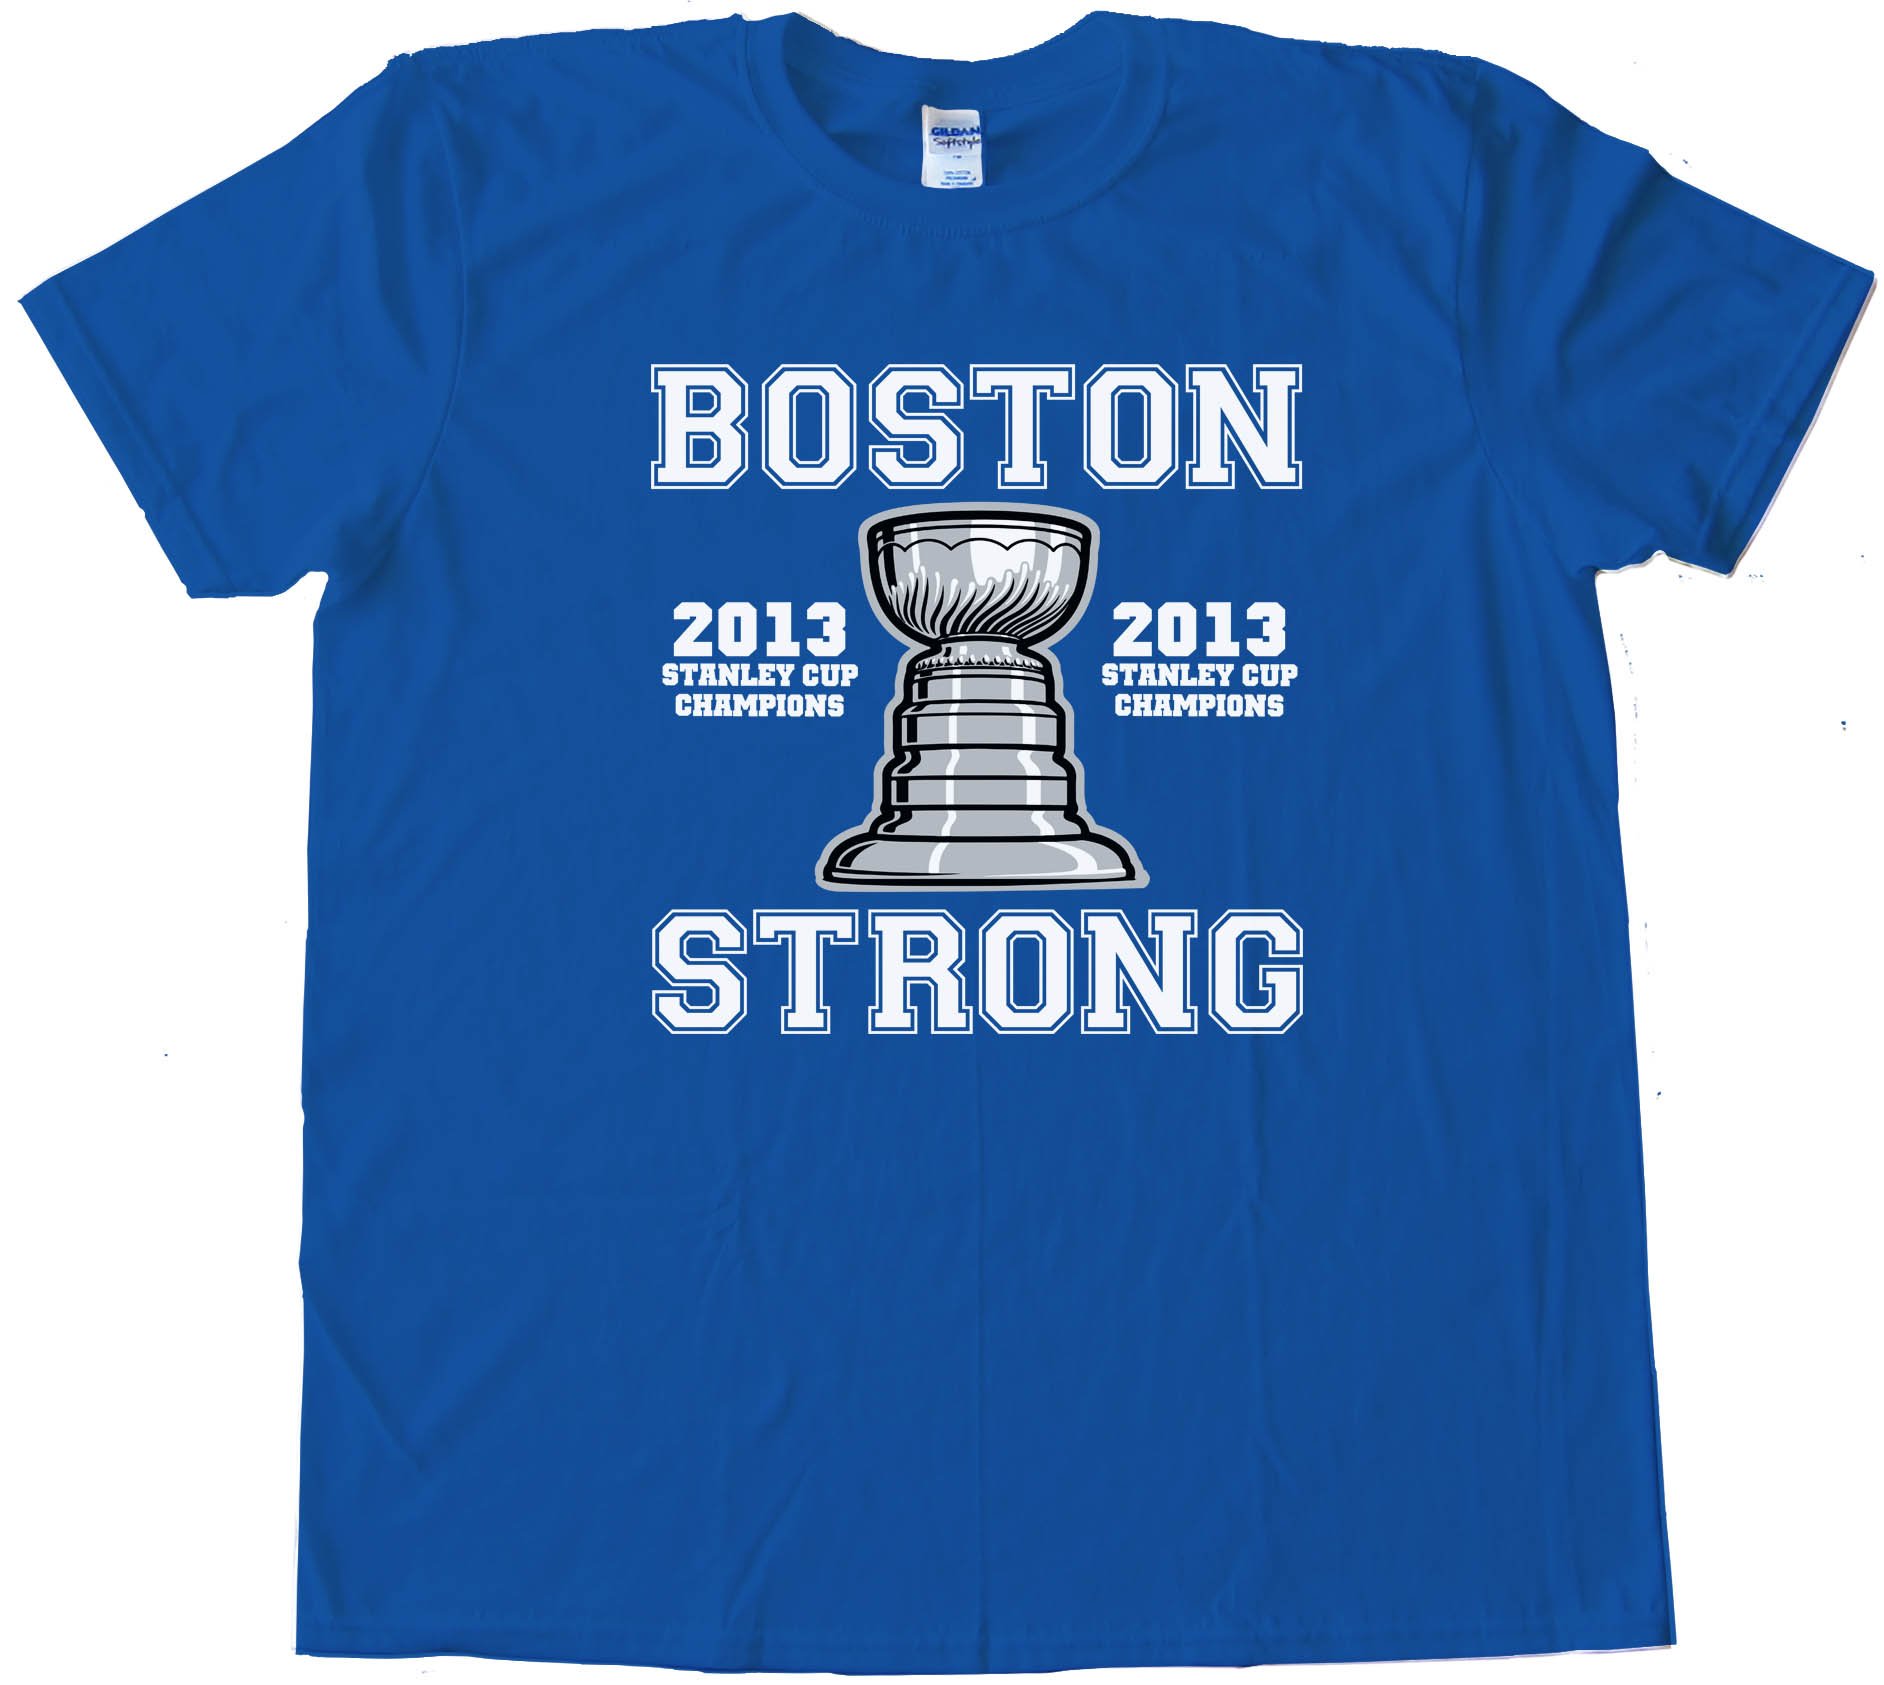 Boston Strong 2013 Stanley Cup Champions - Boston Bruins - Tee Shirt